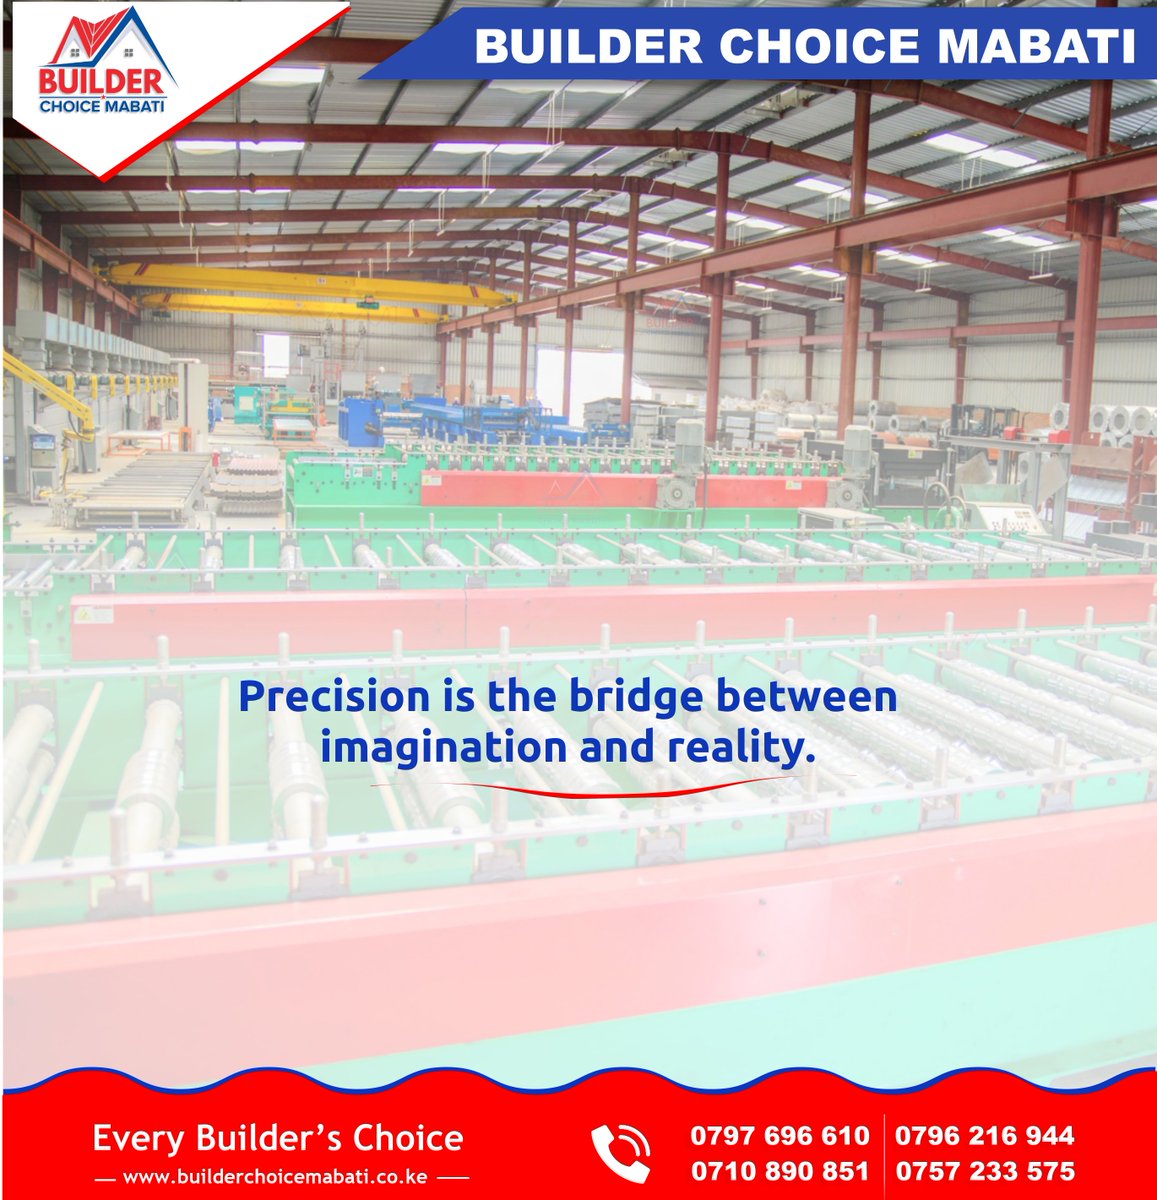 A state-of-the-art production line that guarantees maximum precision on your order.

To shop for mabati, click the link below.

builderchoicemabati.co.ke/shop/

#BuilderChoice #BuildBetter